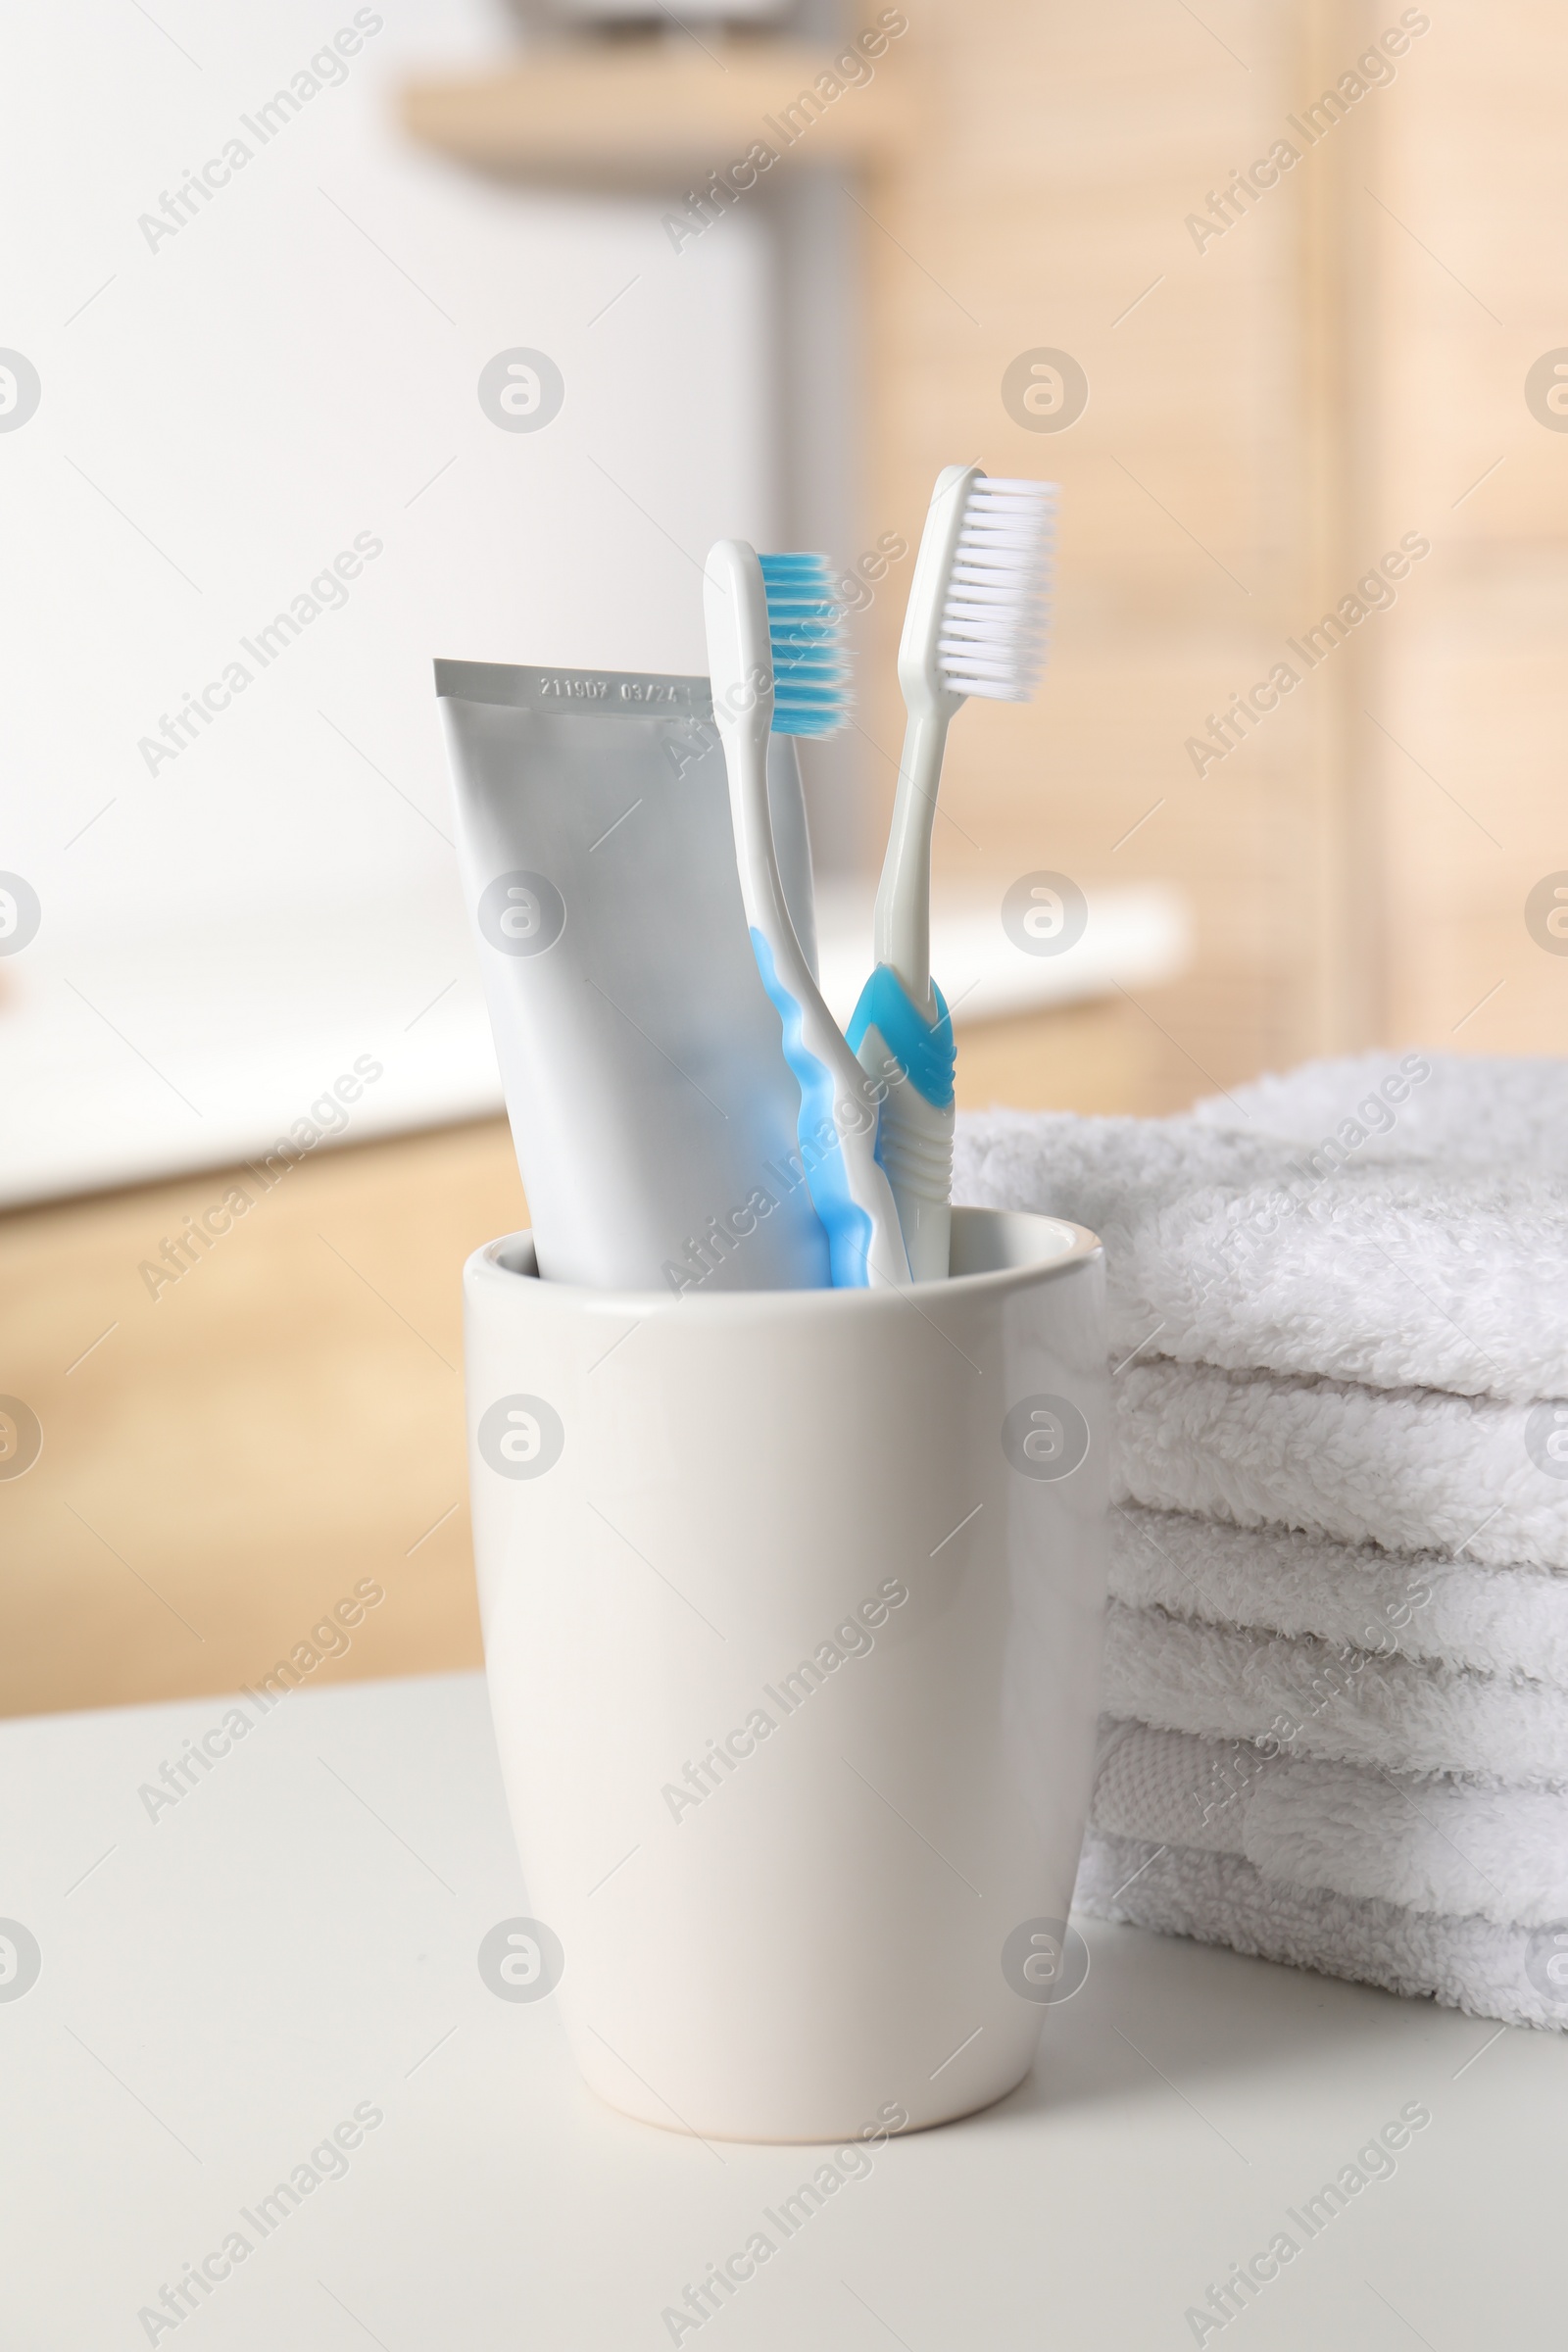 Photo of Plastic toothbrushes, toothpaste and towels on white countertop in bathroom